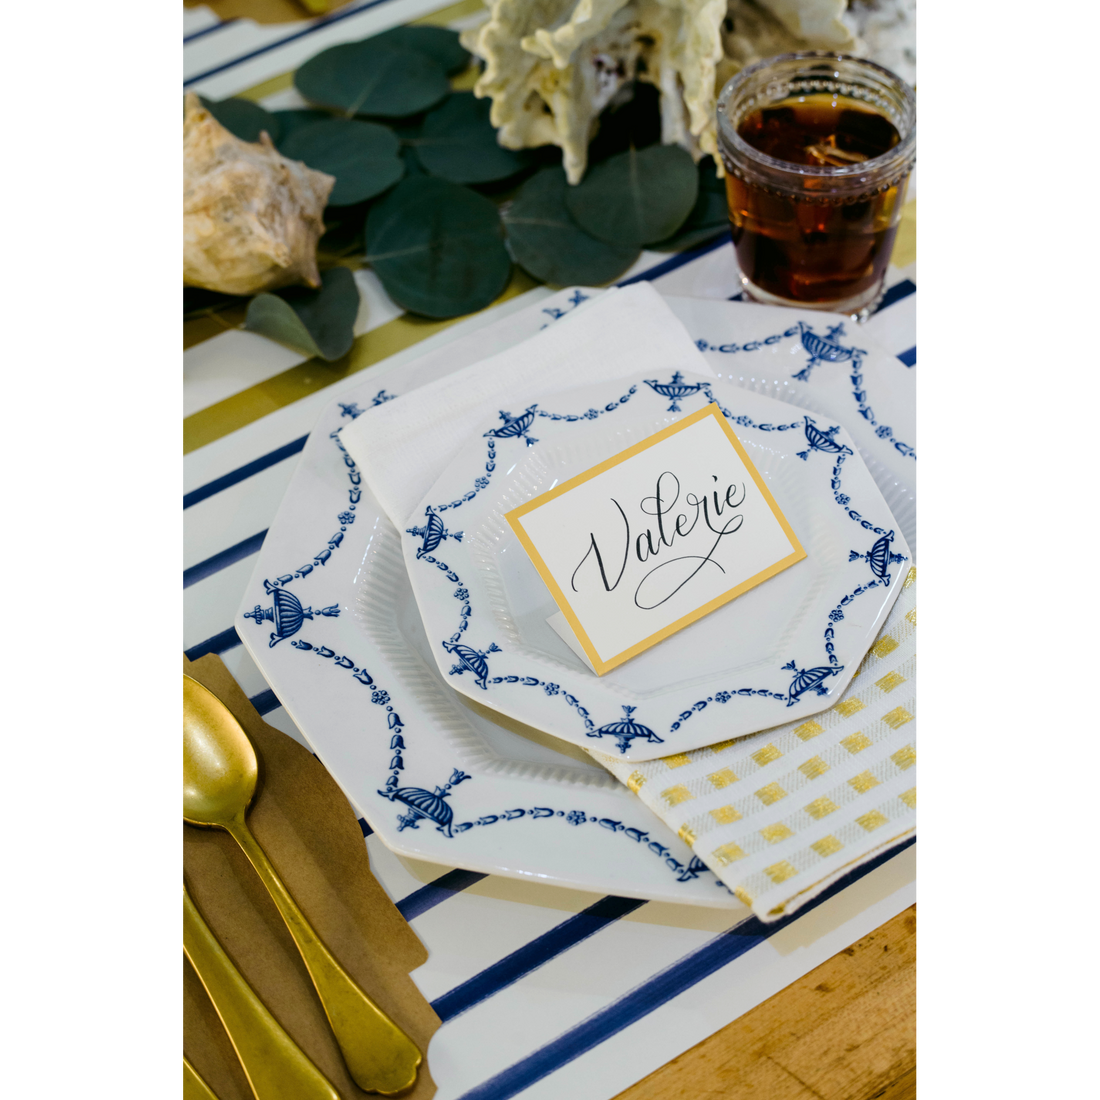 An elegant place setting featuring a Gold Foil Frame Place Card labeled &quot;Valerie&quot; standing on the plate.